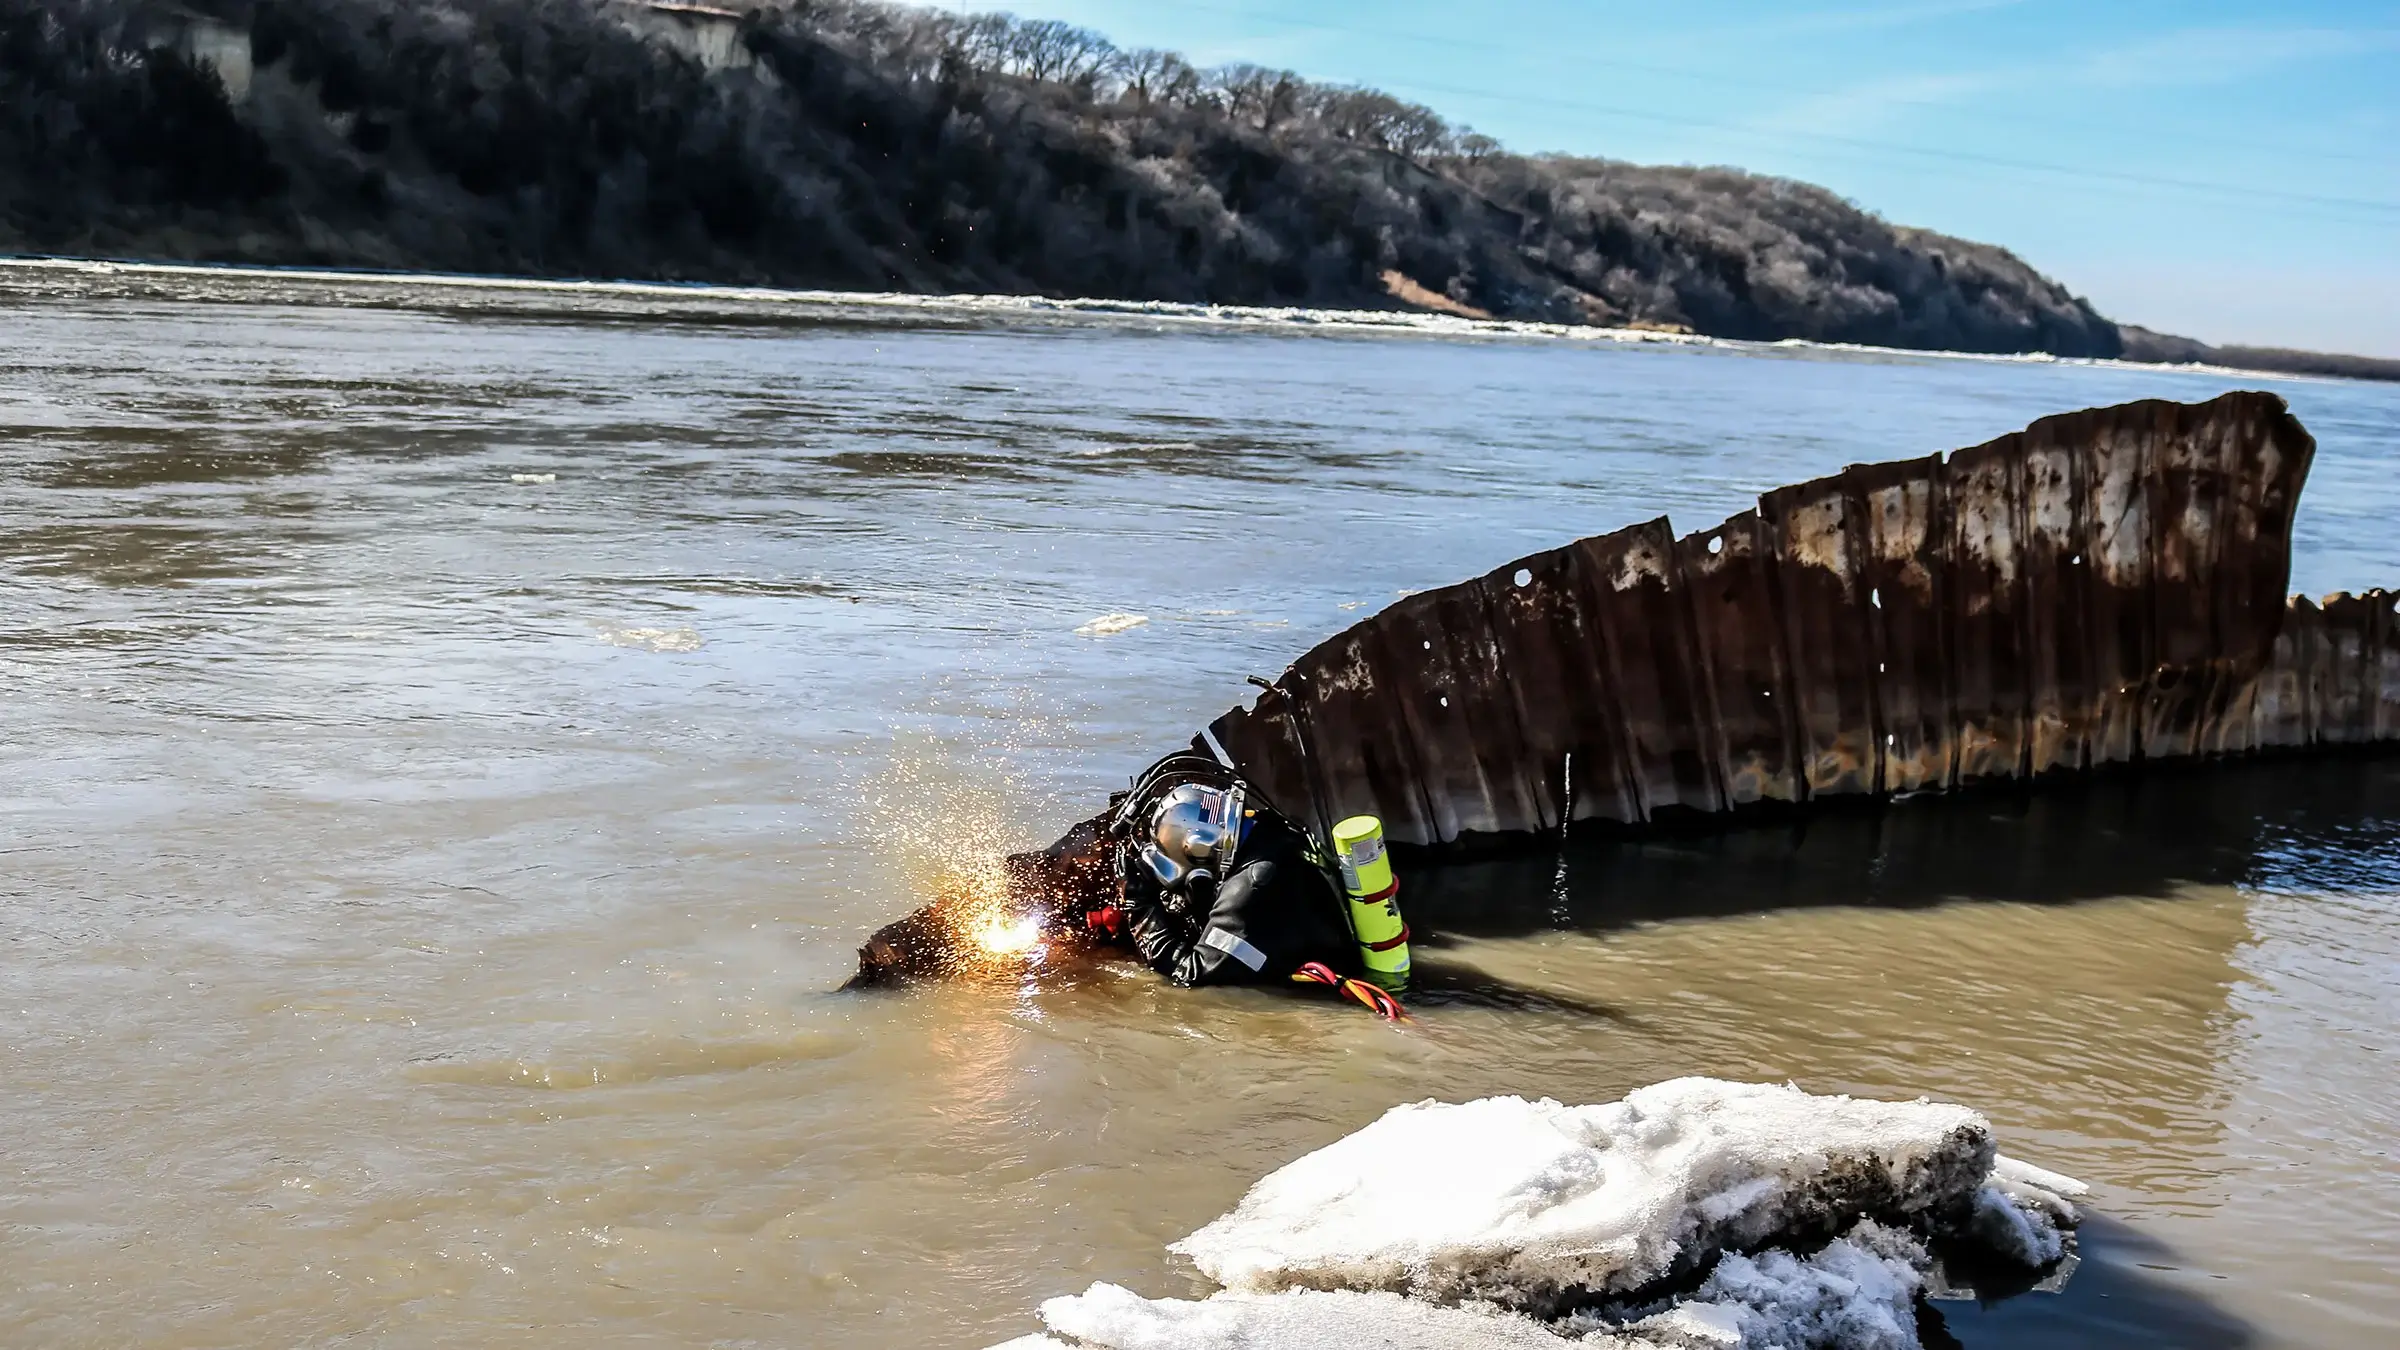 Marine divers are welding in a river.